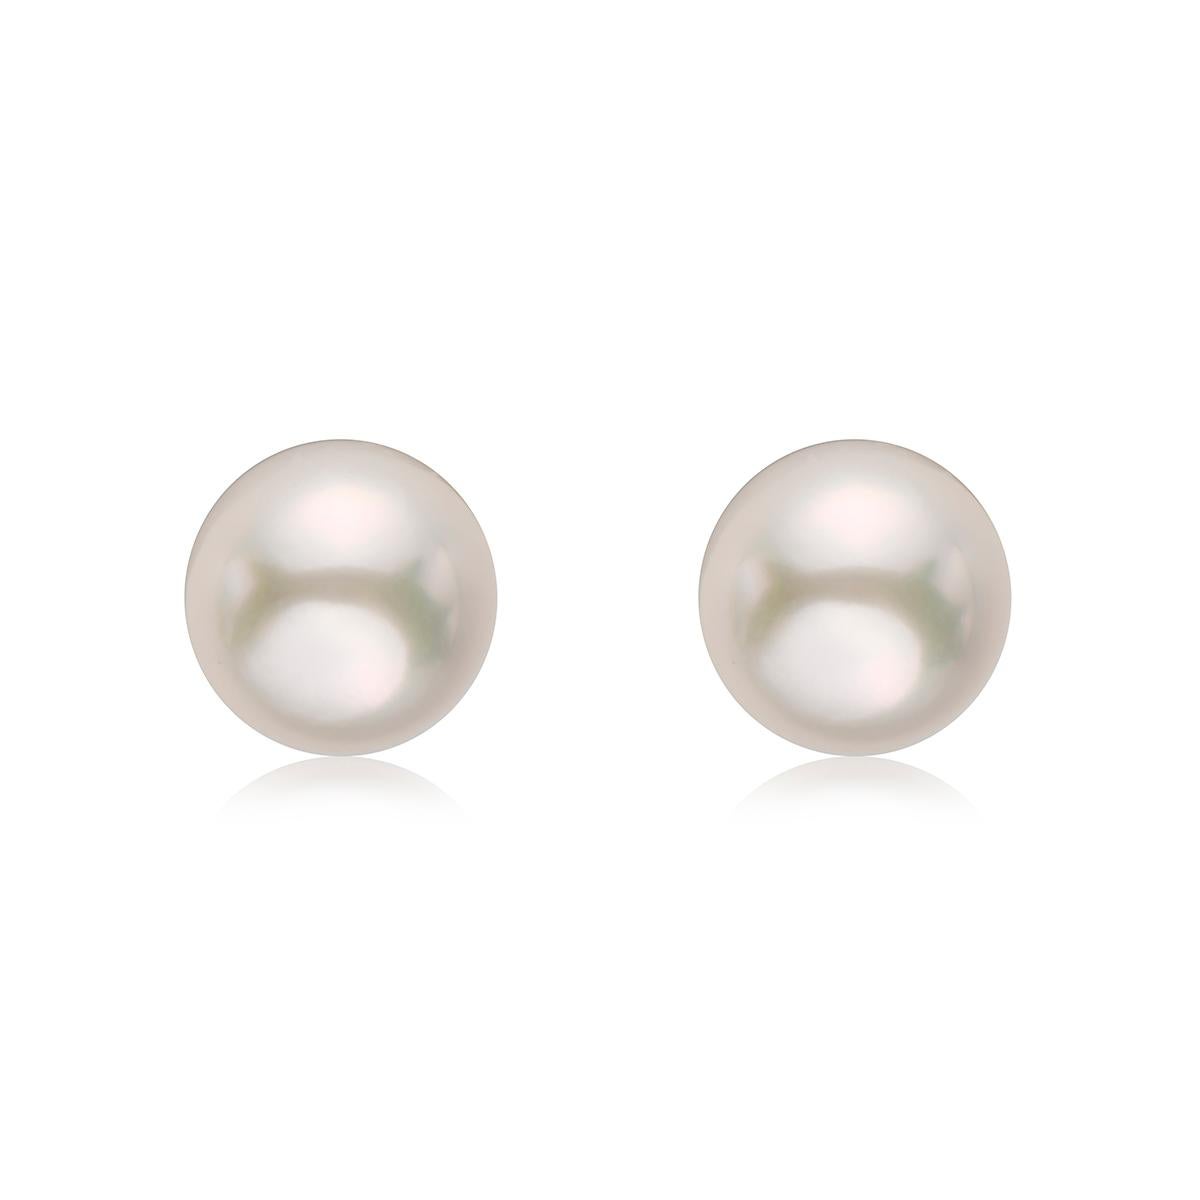 These stud earrings feature Japanese Akoya pearls measuring 8-8.5mm set on 14K White Gold. Classic yet very unique and rare, these are a must for any jewelry collection.
AN ELEGANT EXPRESSION – This gorgeous cultured pearl jewelry adds a luminous